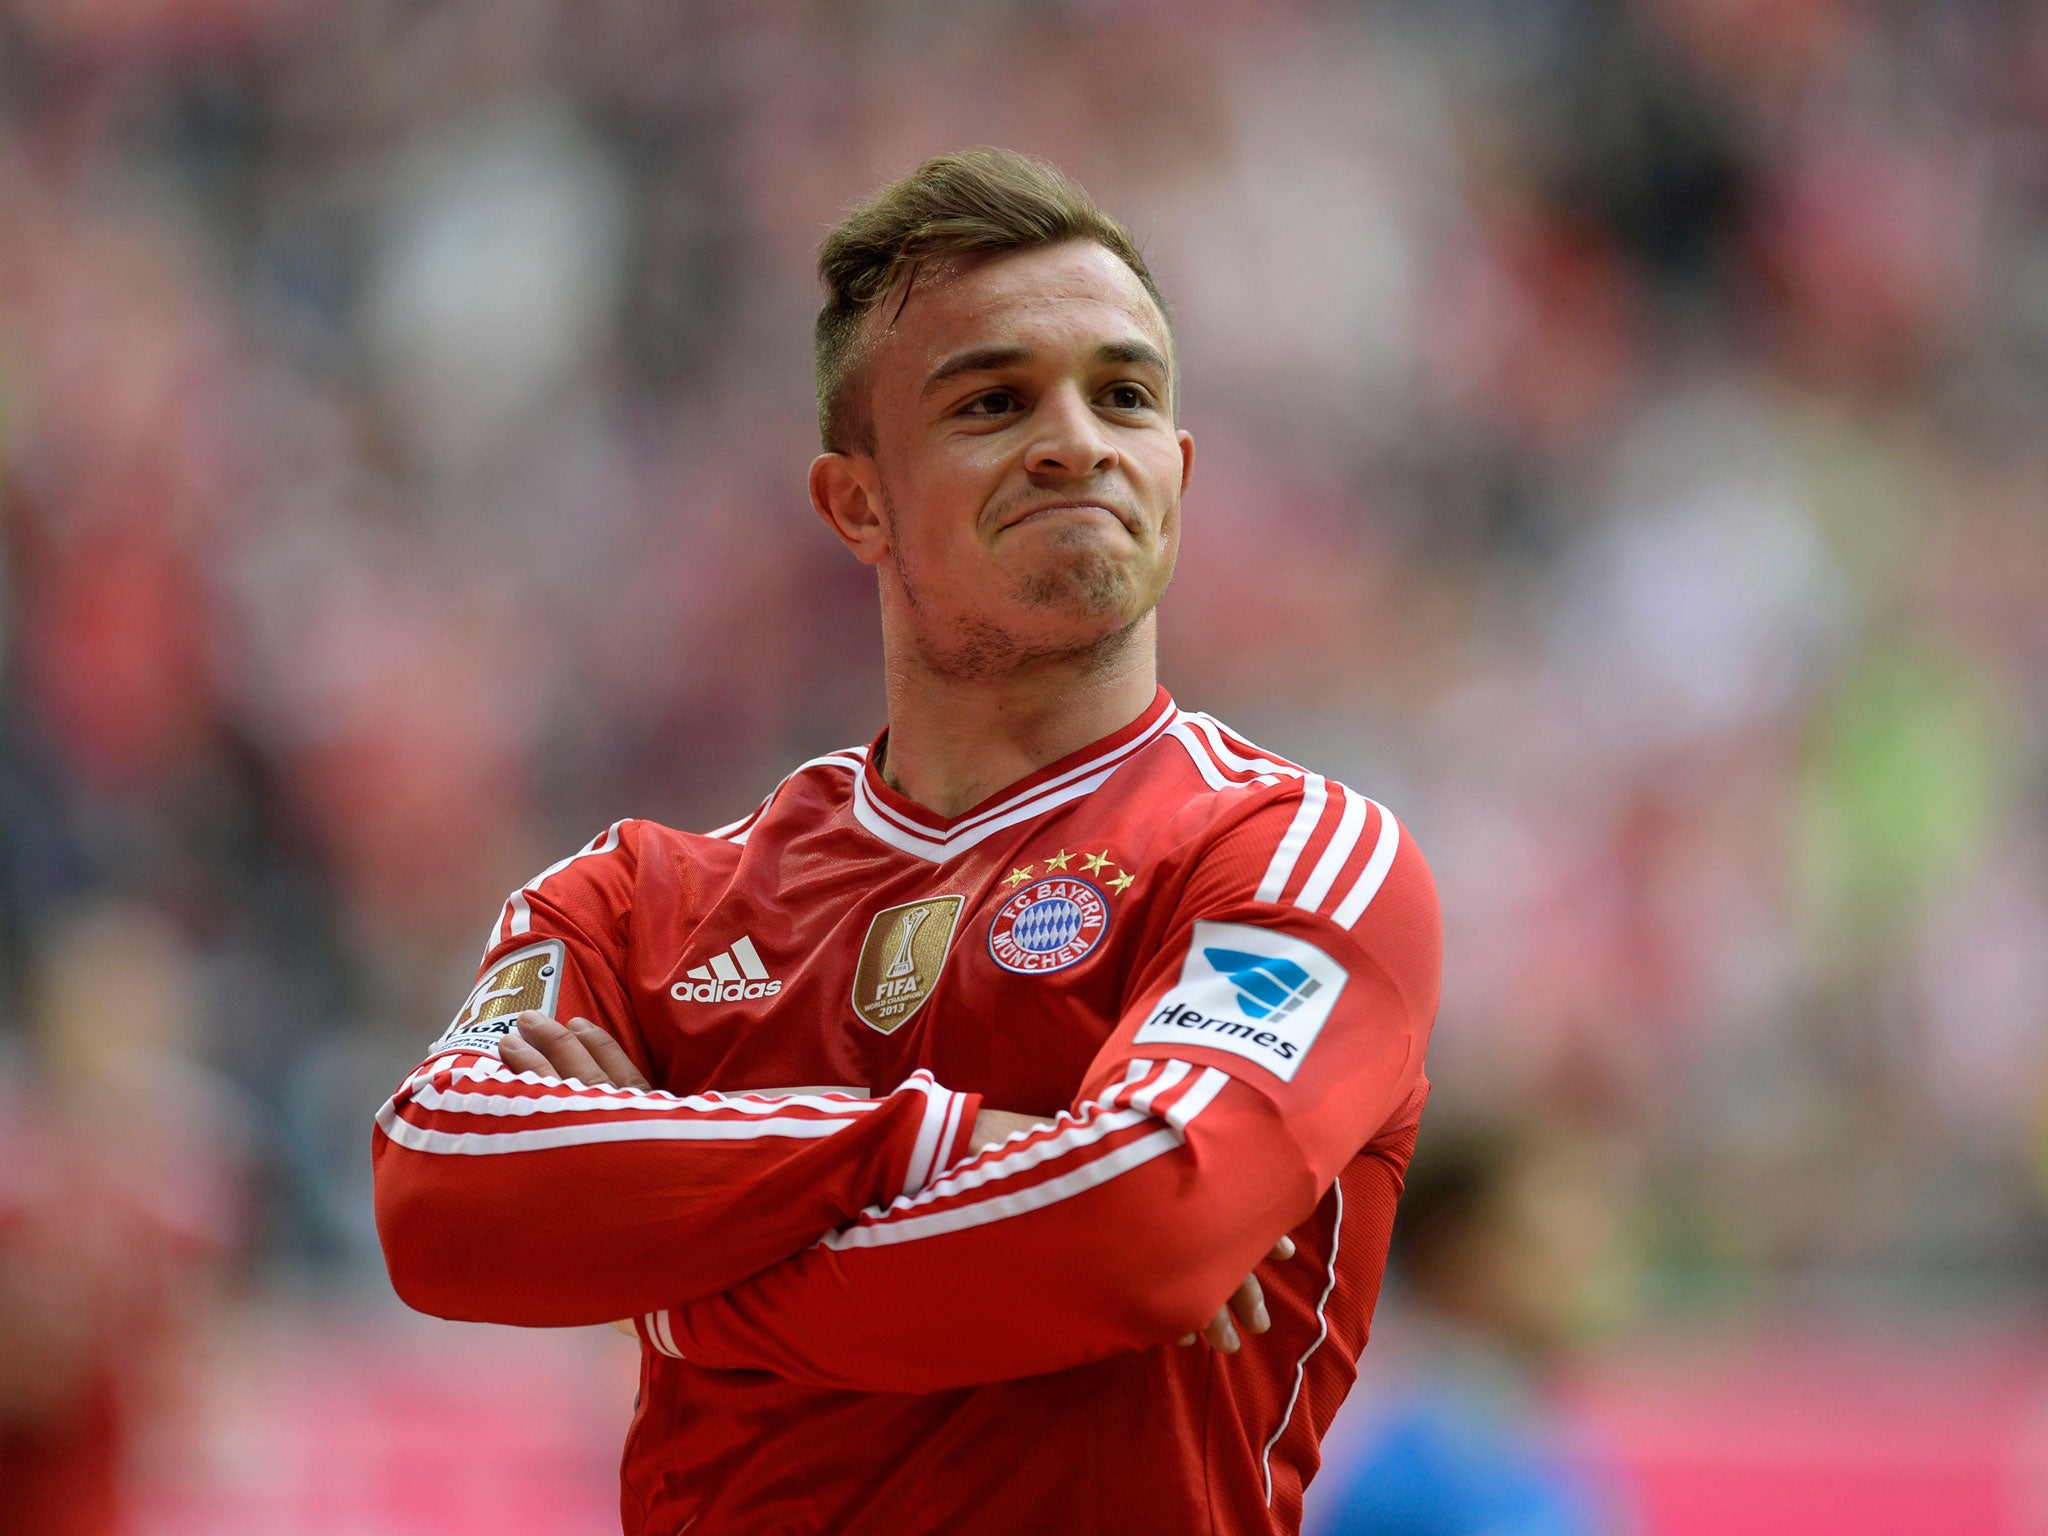 Bayern Munich winger Xherdan Shaqiri has been ruled out of the Champions League first leg with Arsenal